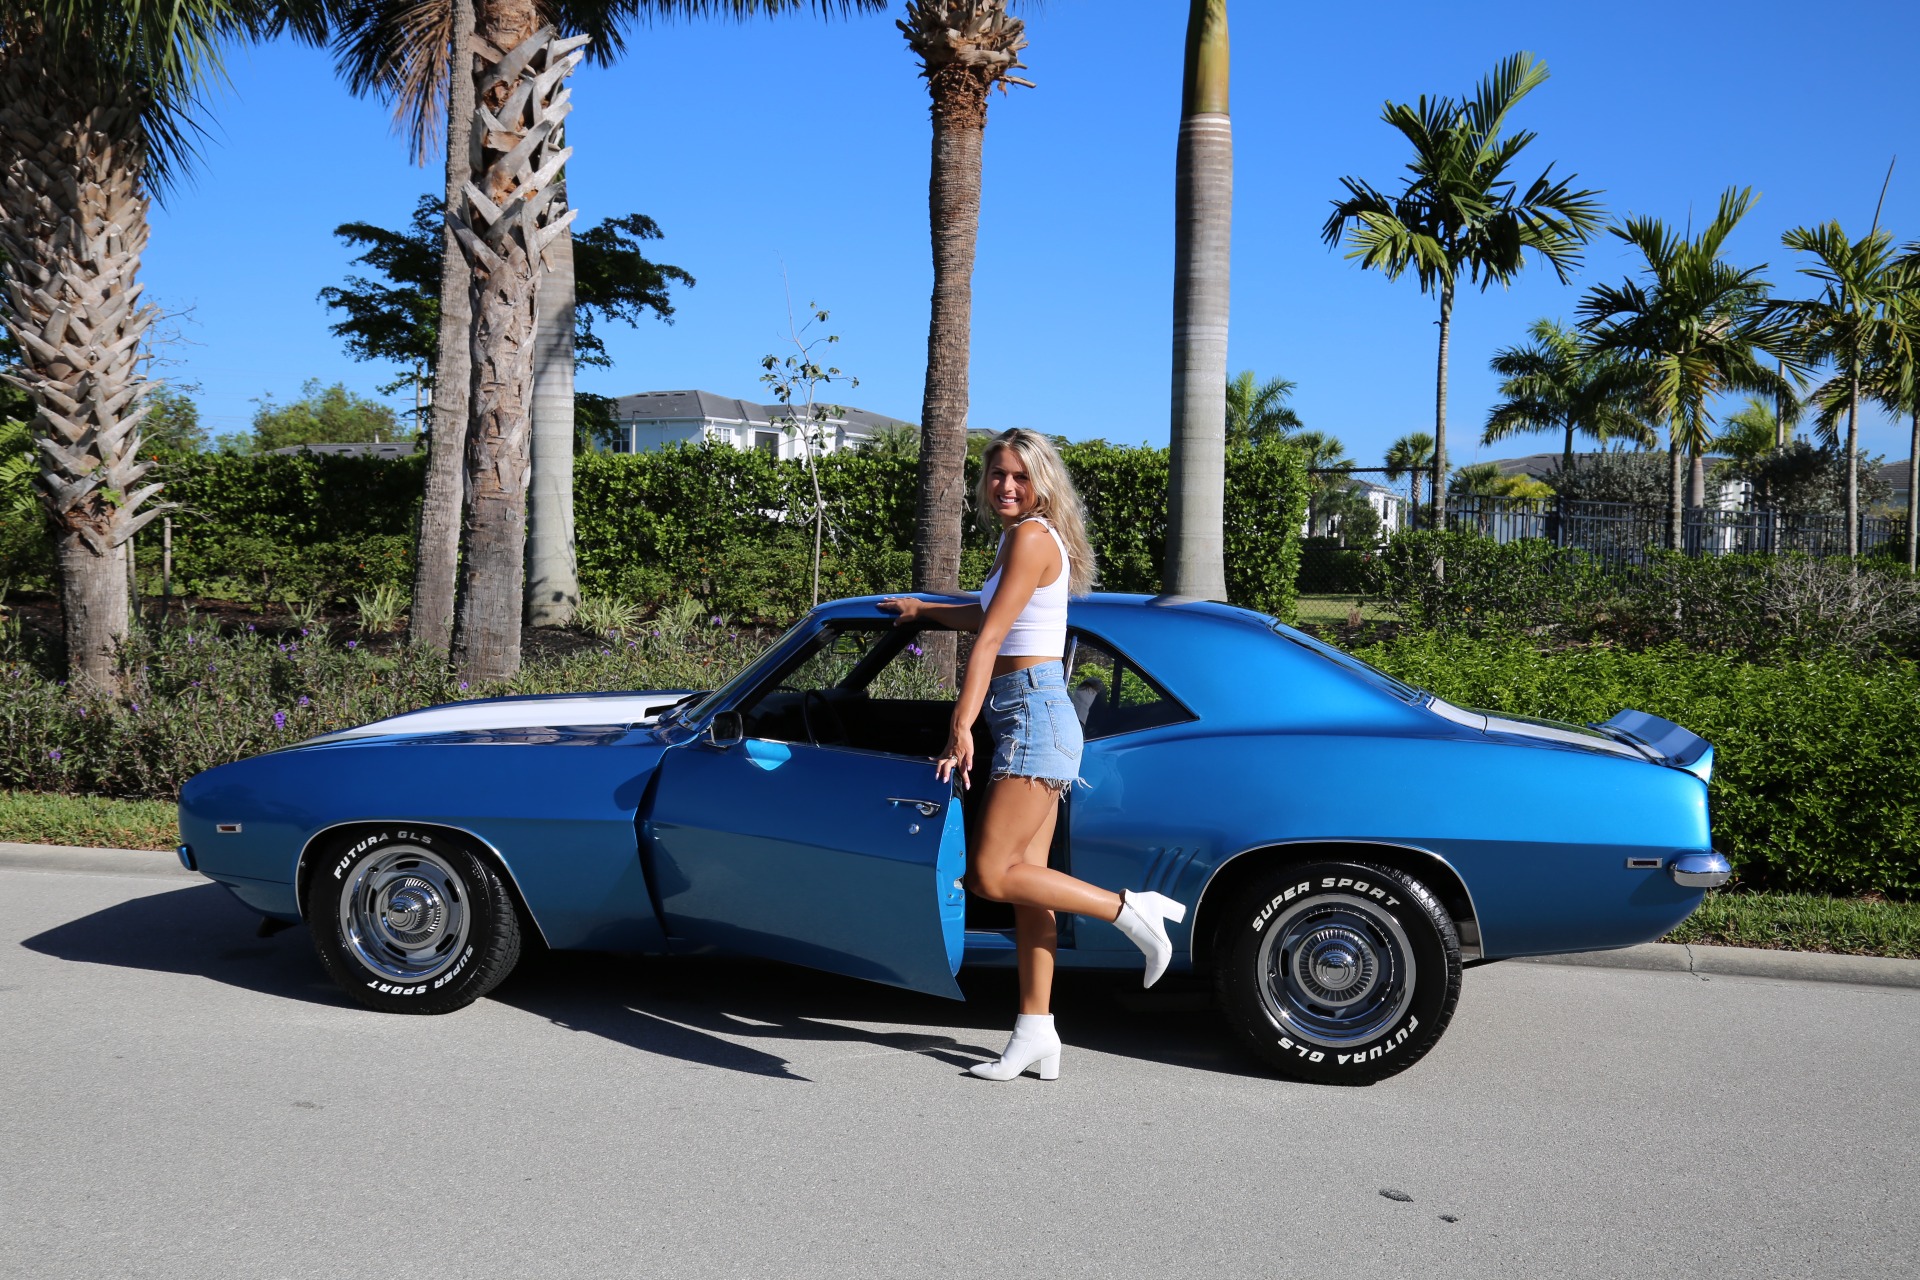 Used 1969 Chevrolet Camaro V8 Auto for sale Sold at Muscle Cars for Sale Inc. in Fort Myers FL 33912 4